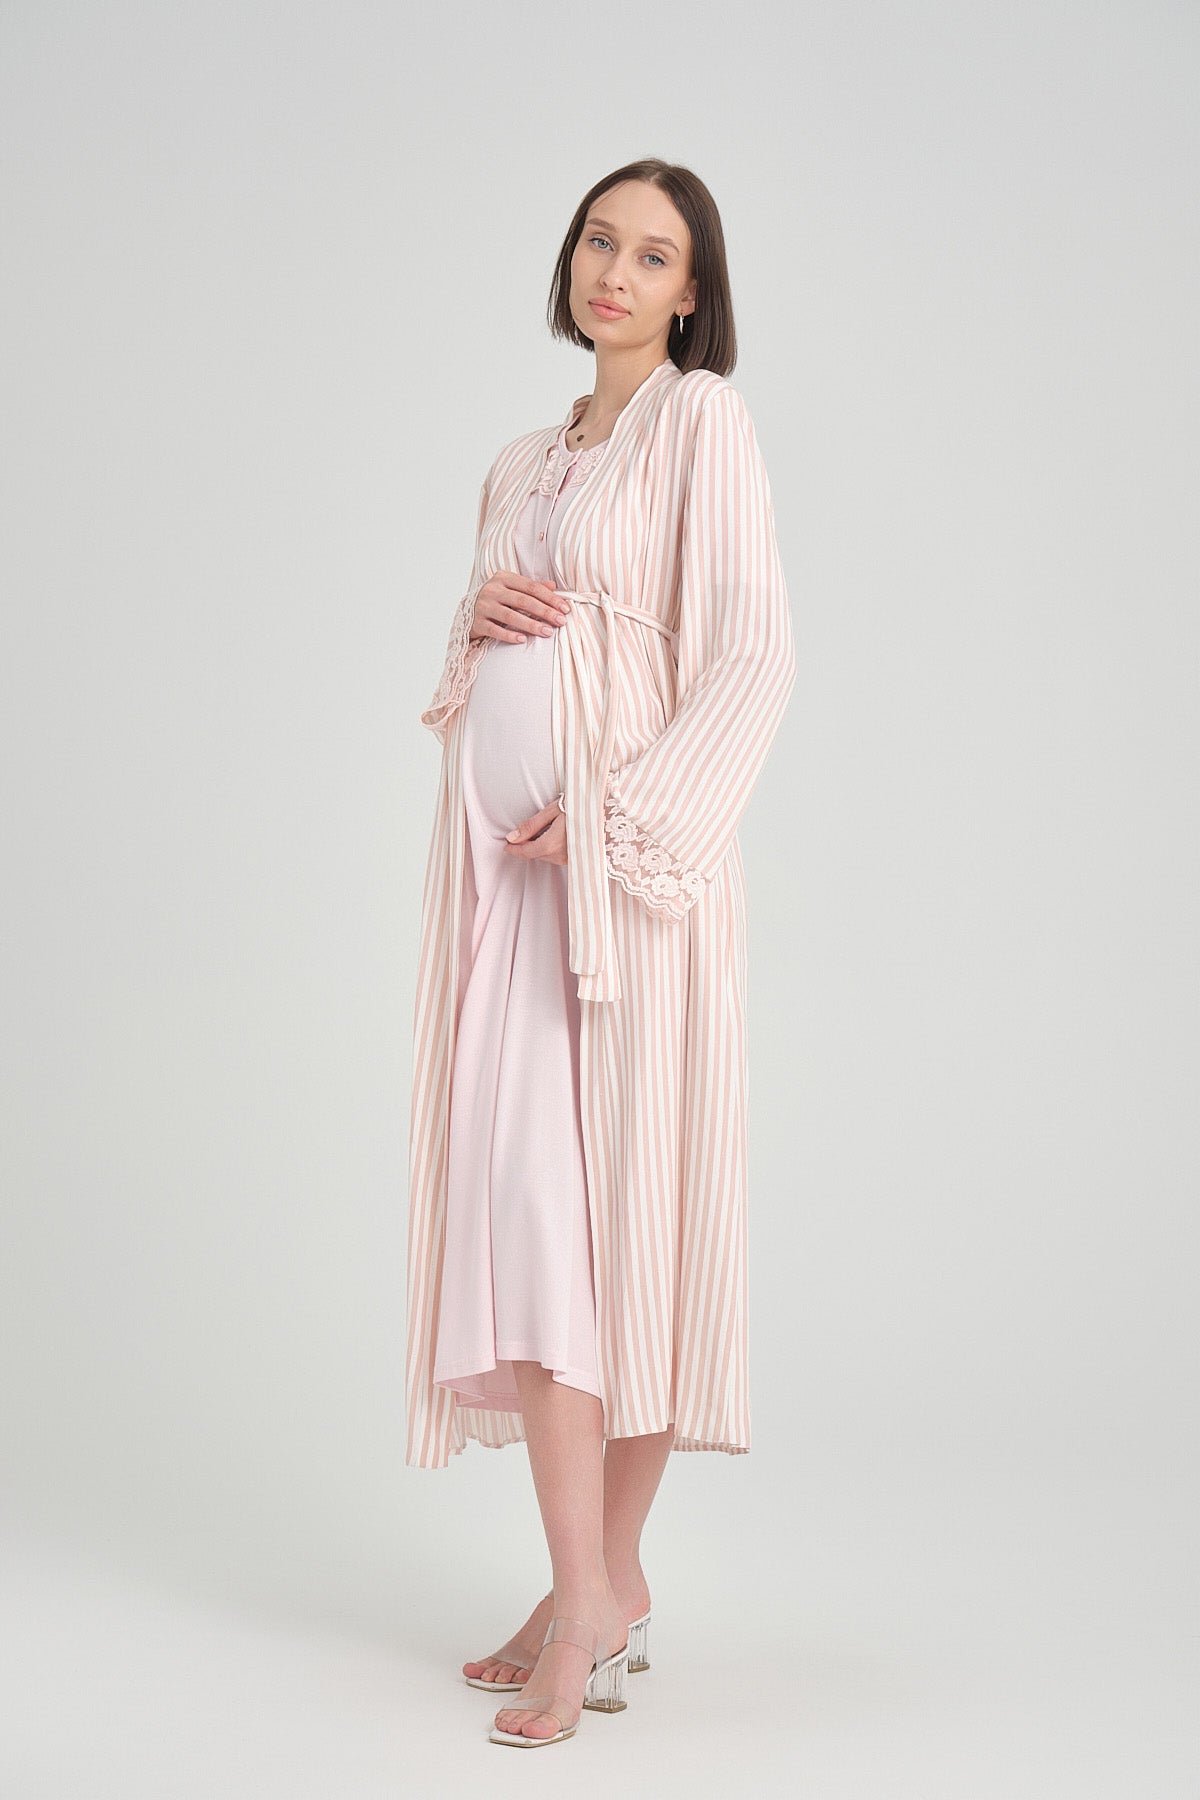 Shopymommy 2386 Lace Collar Maternity & Nursing Nightgown With Stripe Robe Pink